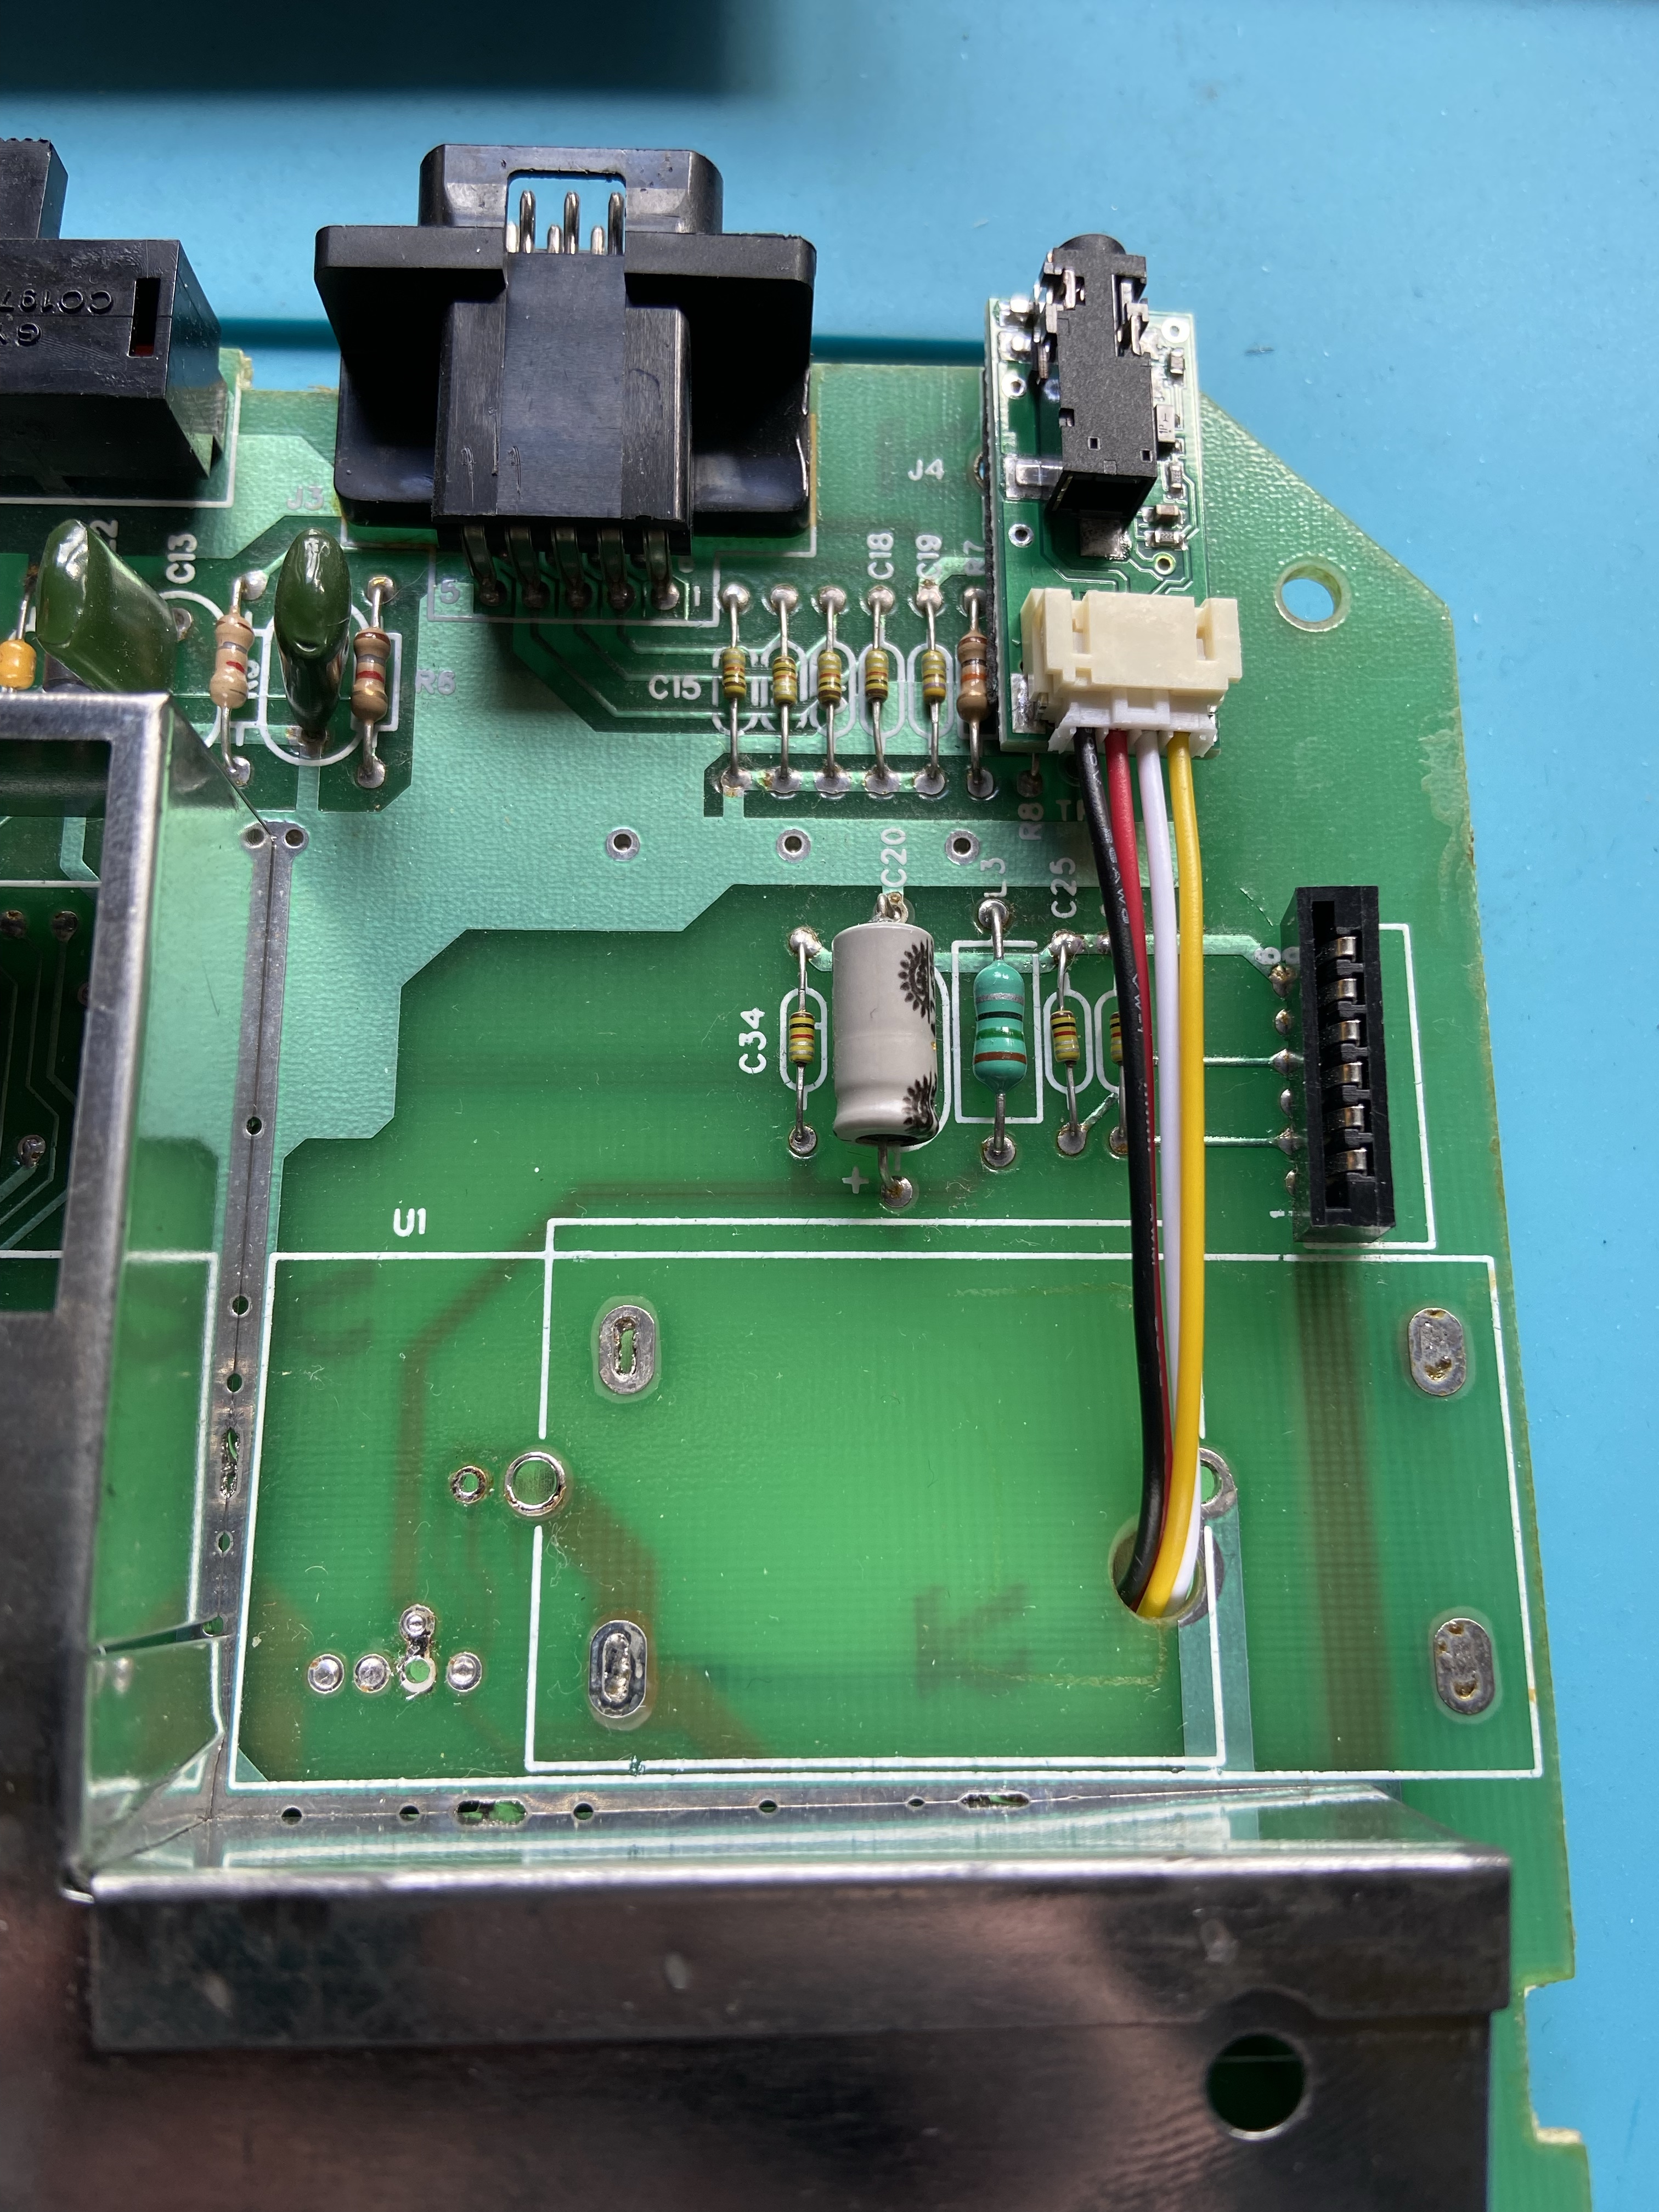 TRRS socket installed for a composite mod in an Atari 2600 Jr.